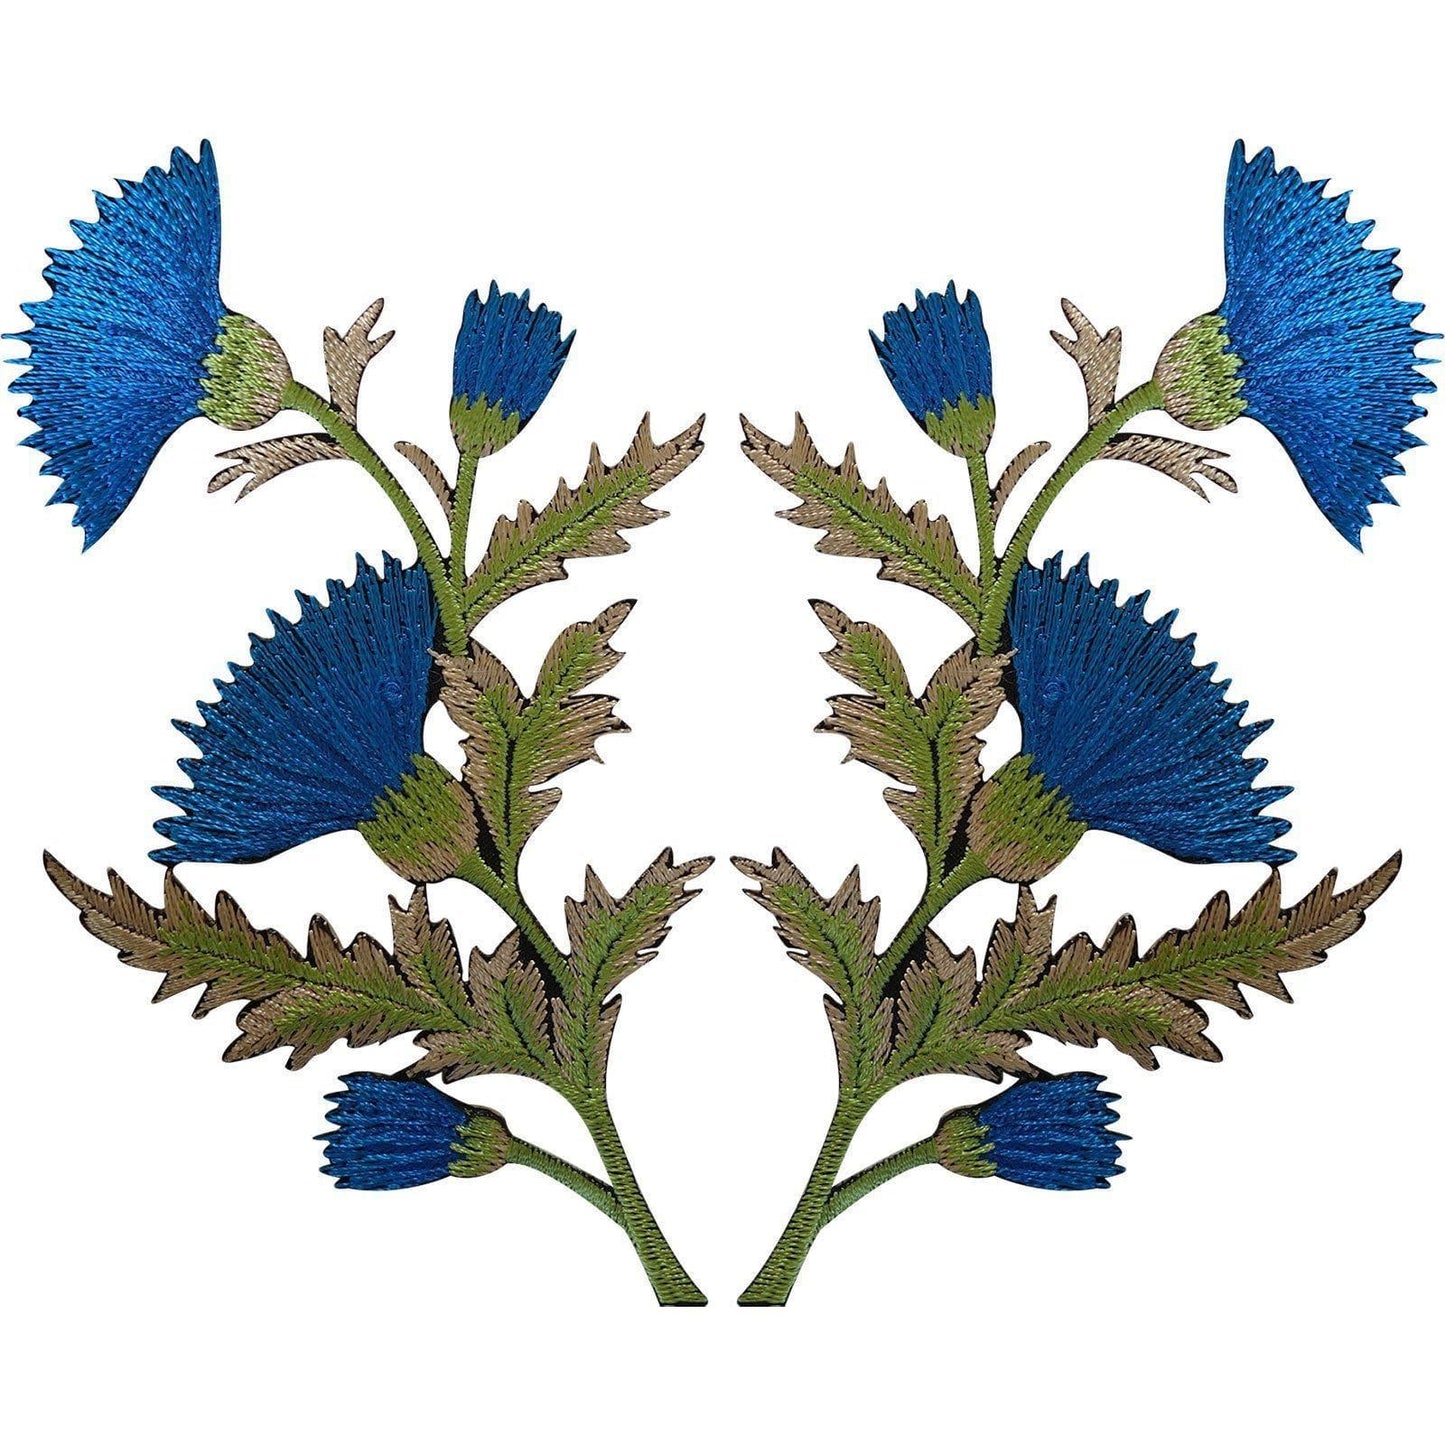 Pair of Blue Thistle Flower Patches Iron Sew On Embroidered Patch Badge Flowers